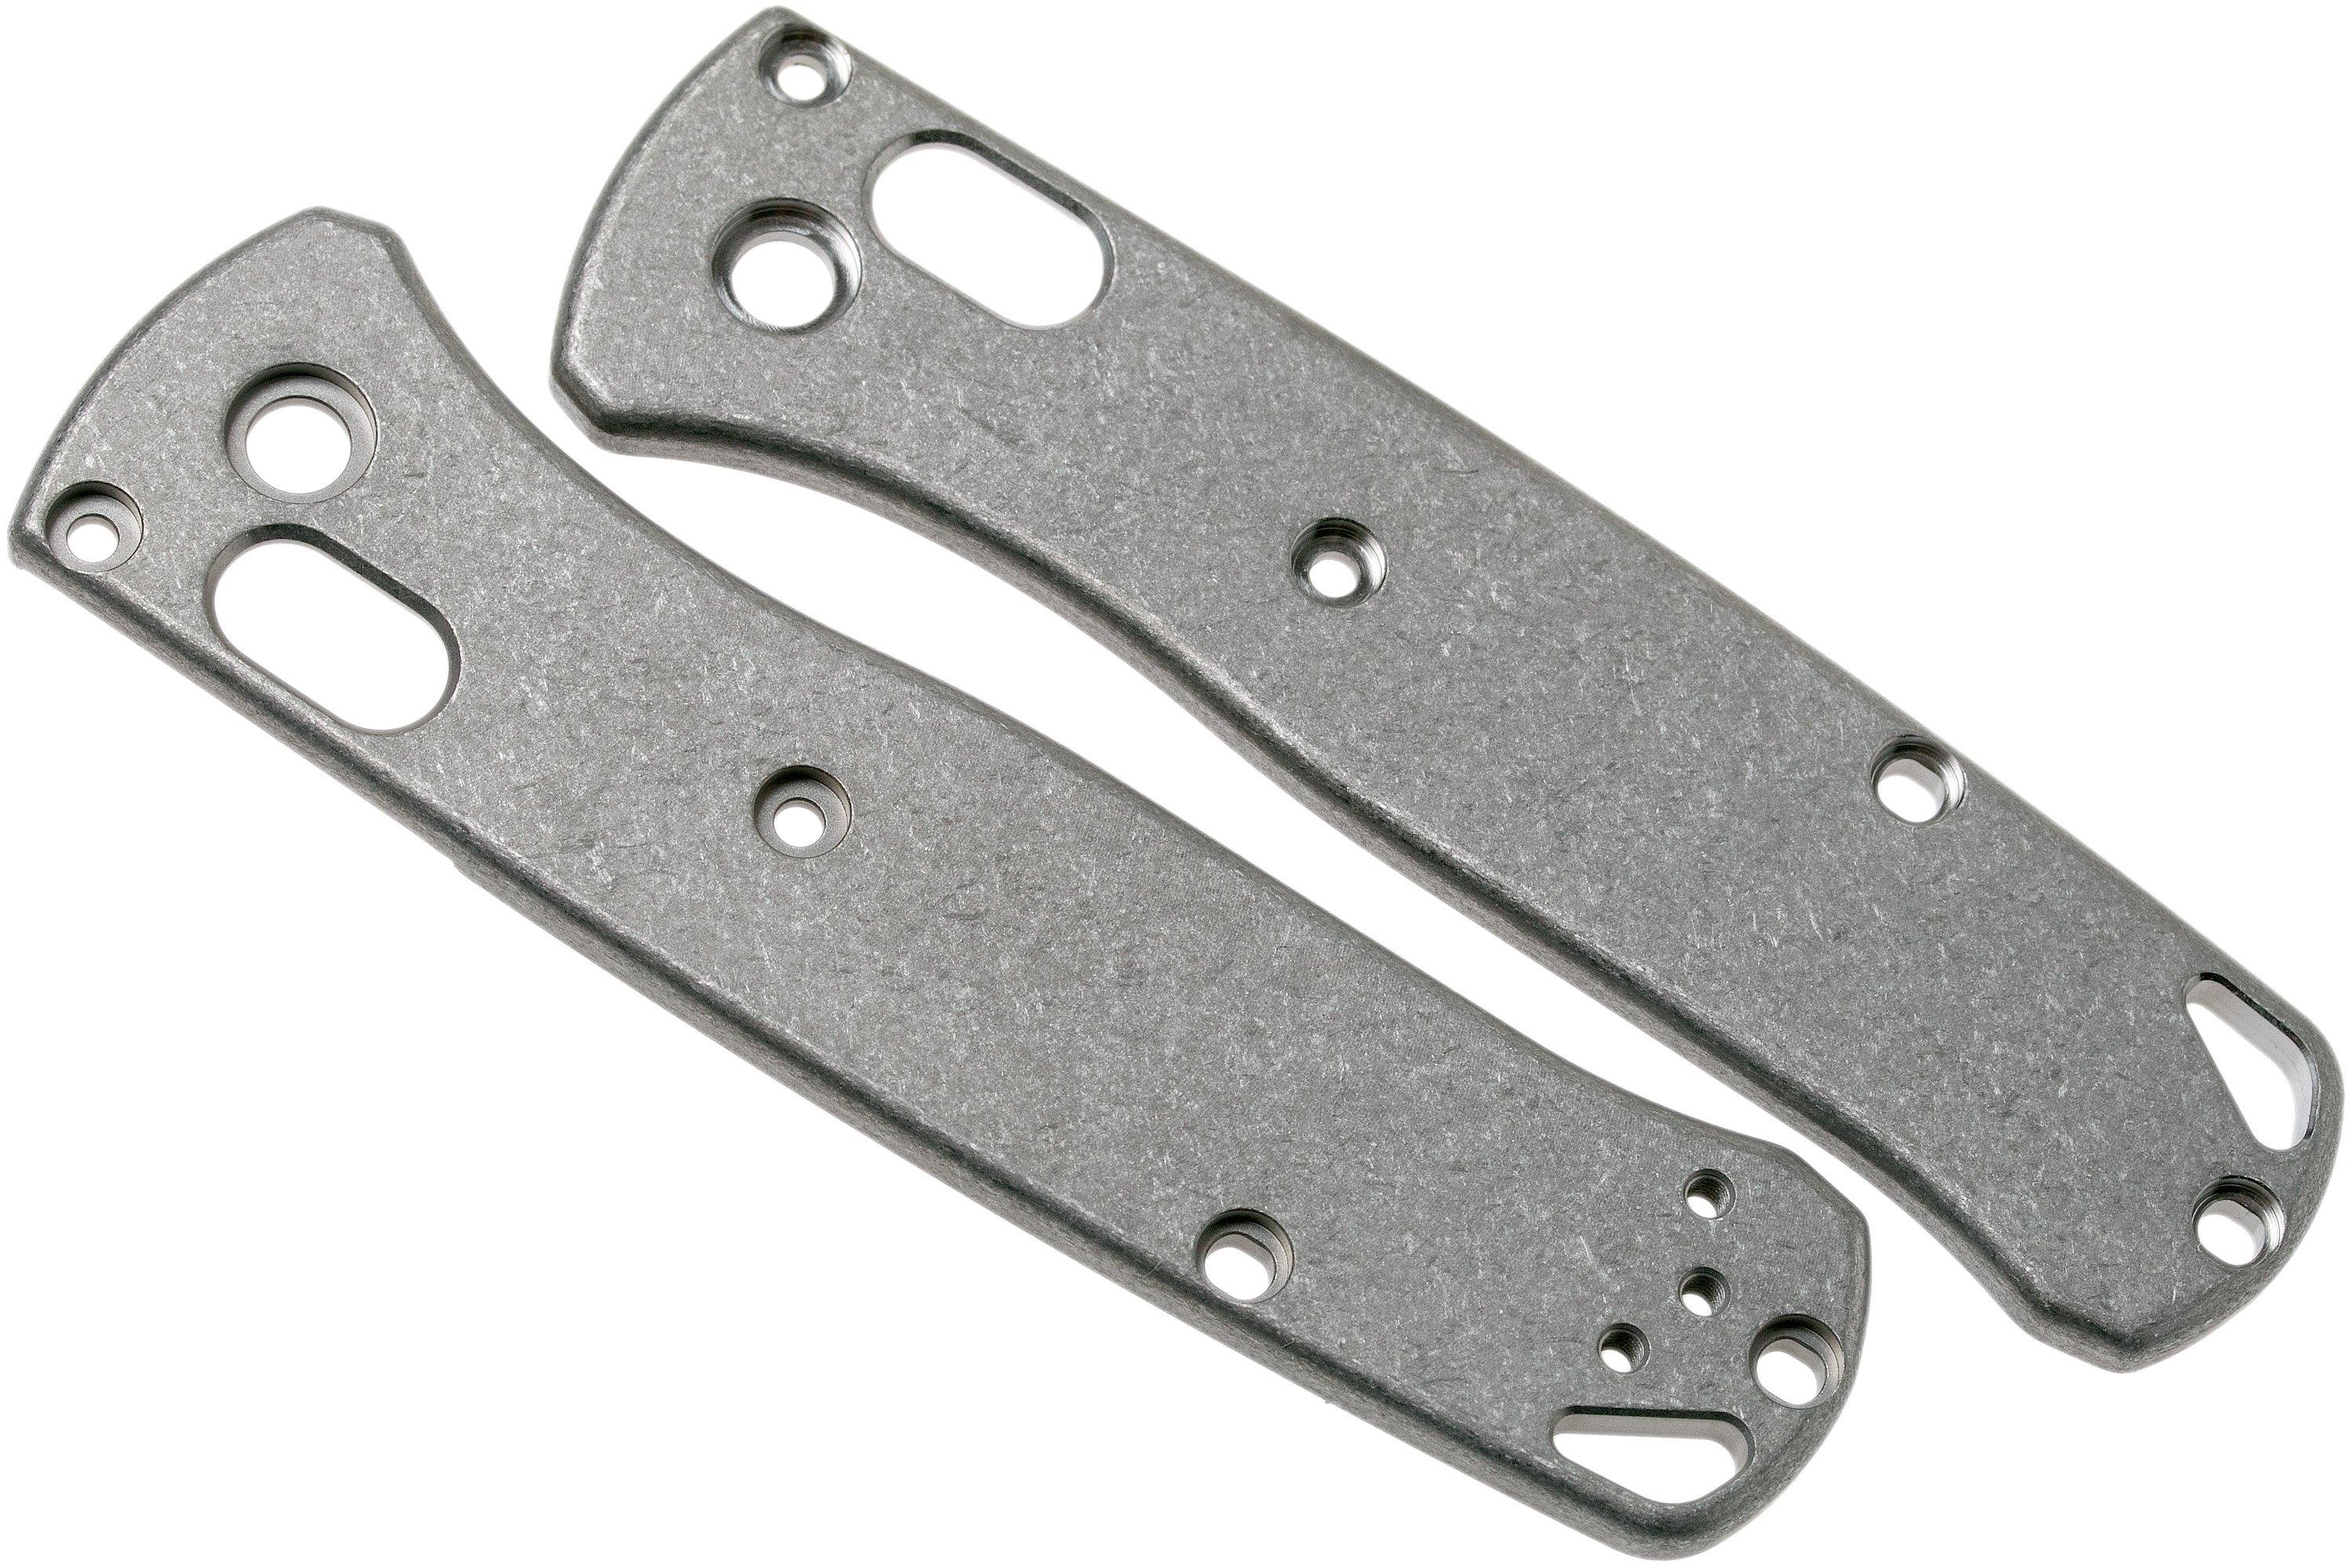 Flytanium FLY-524 Bugout Handle Scales Ti Handle 